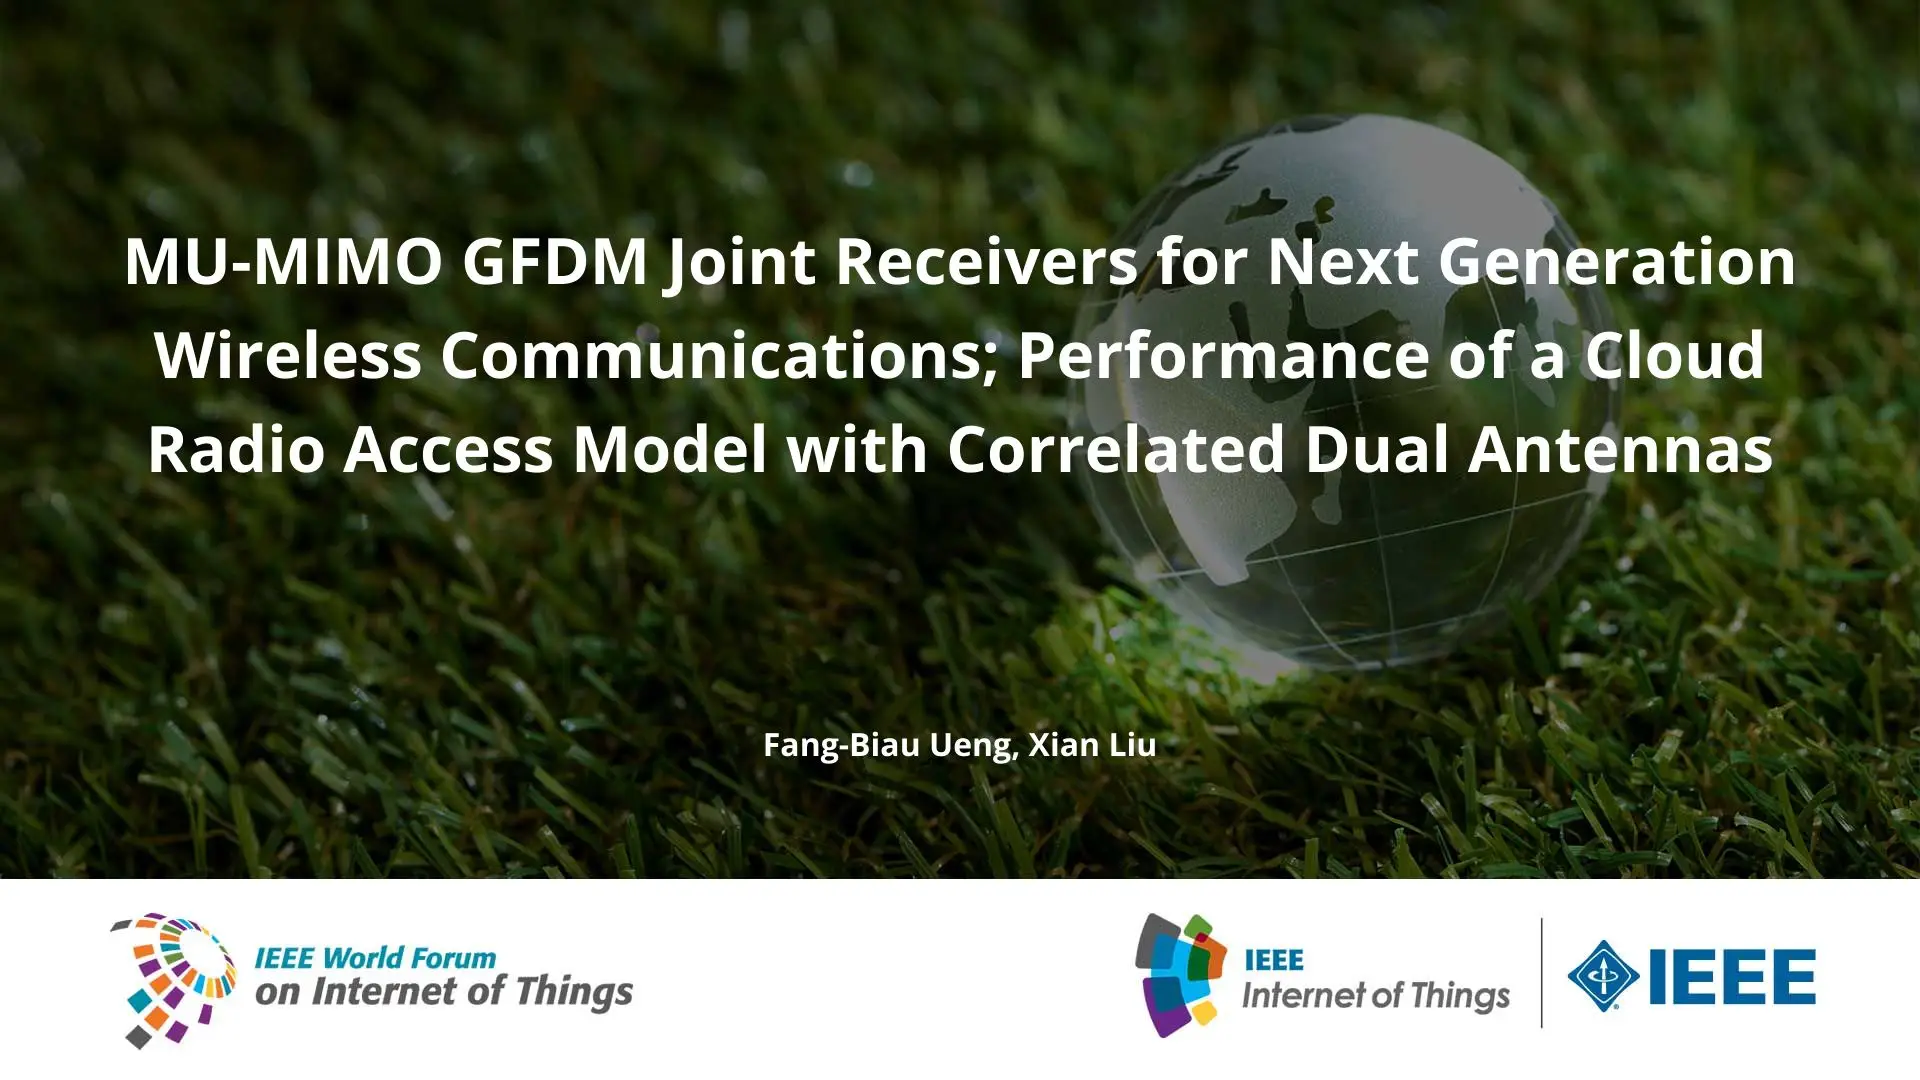 MU-MIMO GFDM Joint Receivers for Next Generation Wireless Communications; Performance of a Cloud Radio Access Model with Correlated Dual Antennas